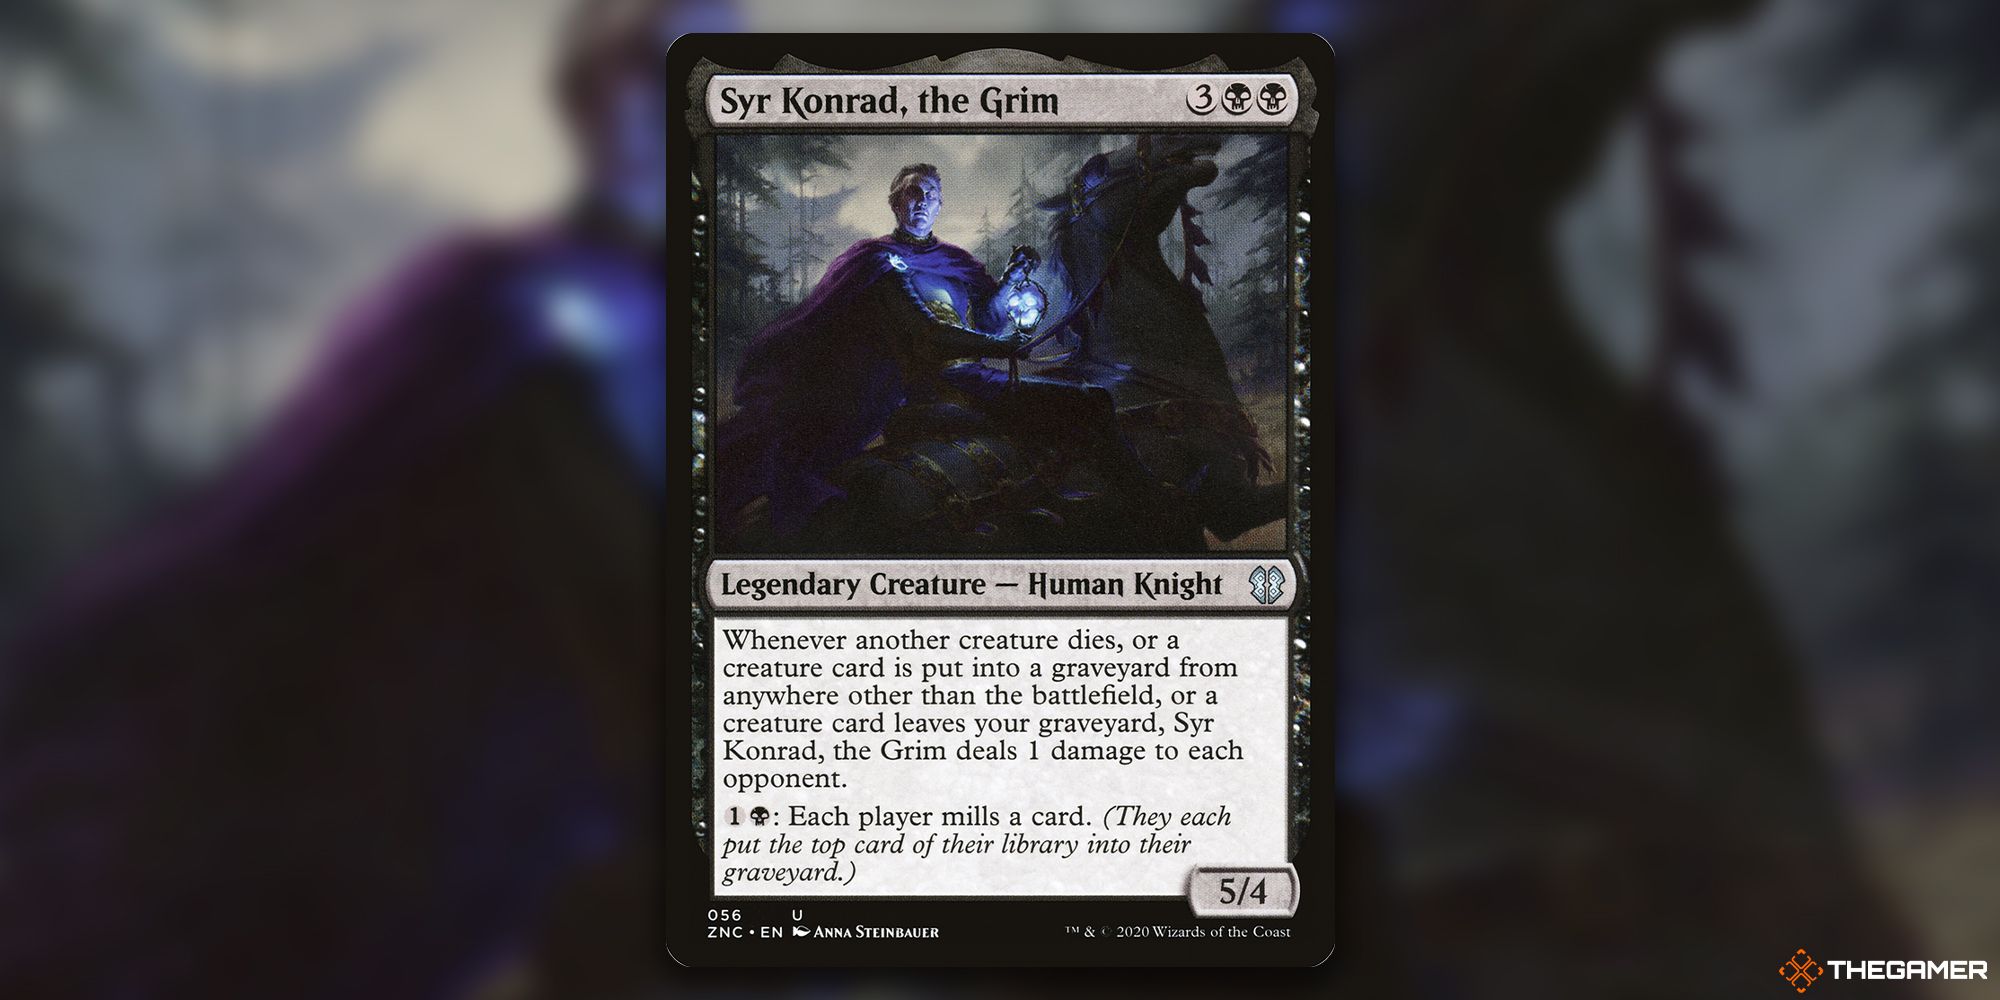 Image of the Syr Konrad, the Grim  card in Magic: The Gathering, with art by Anna Steinbauer